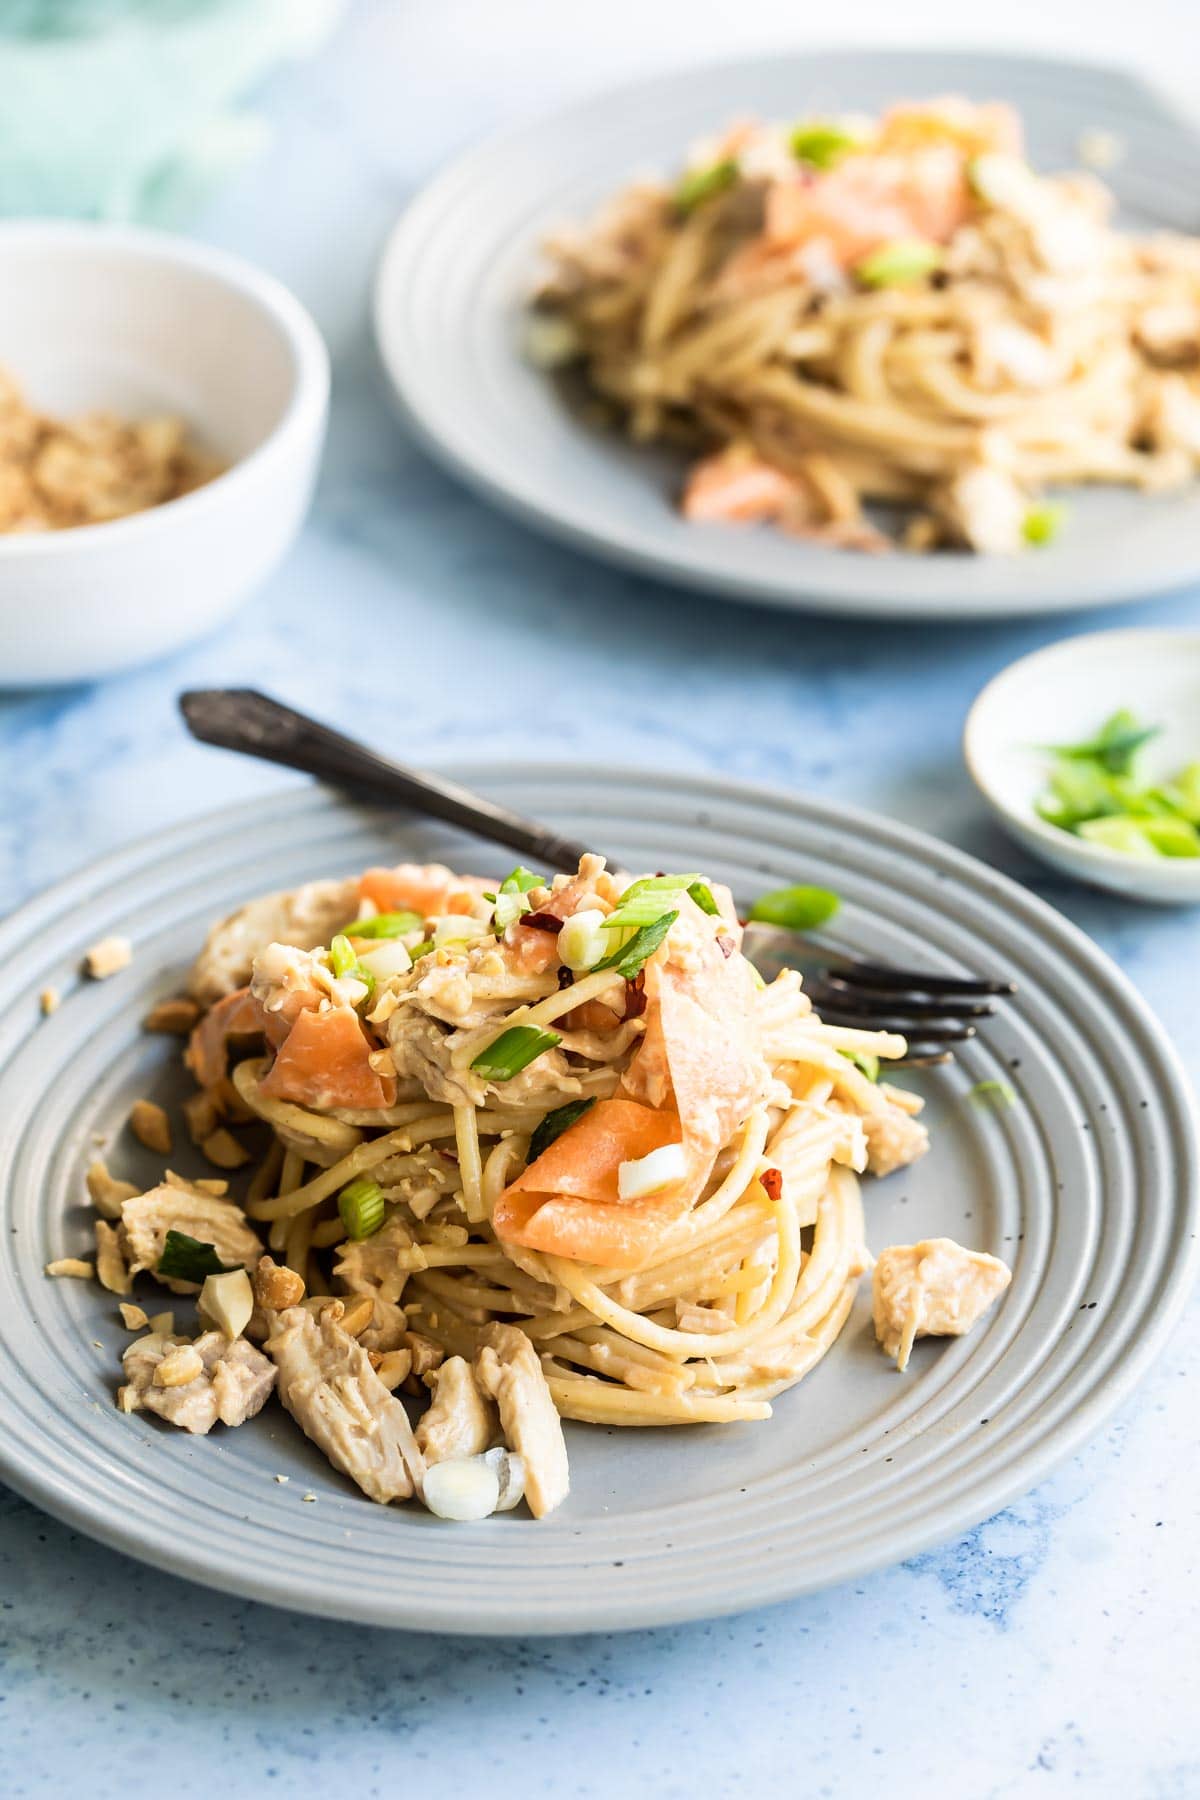 Thai peanut chicken noodles on a gray plate.